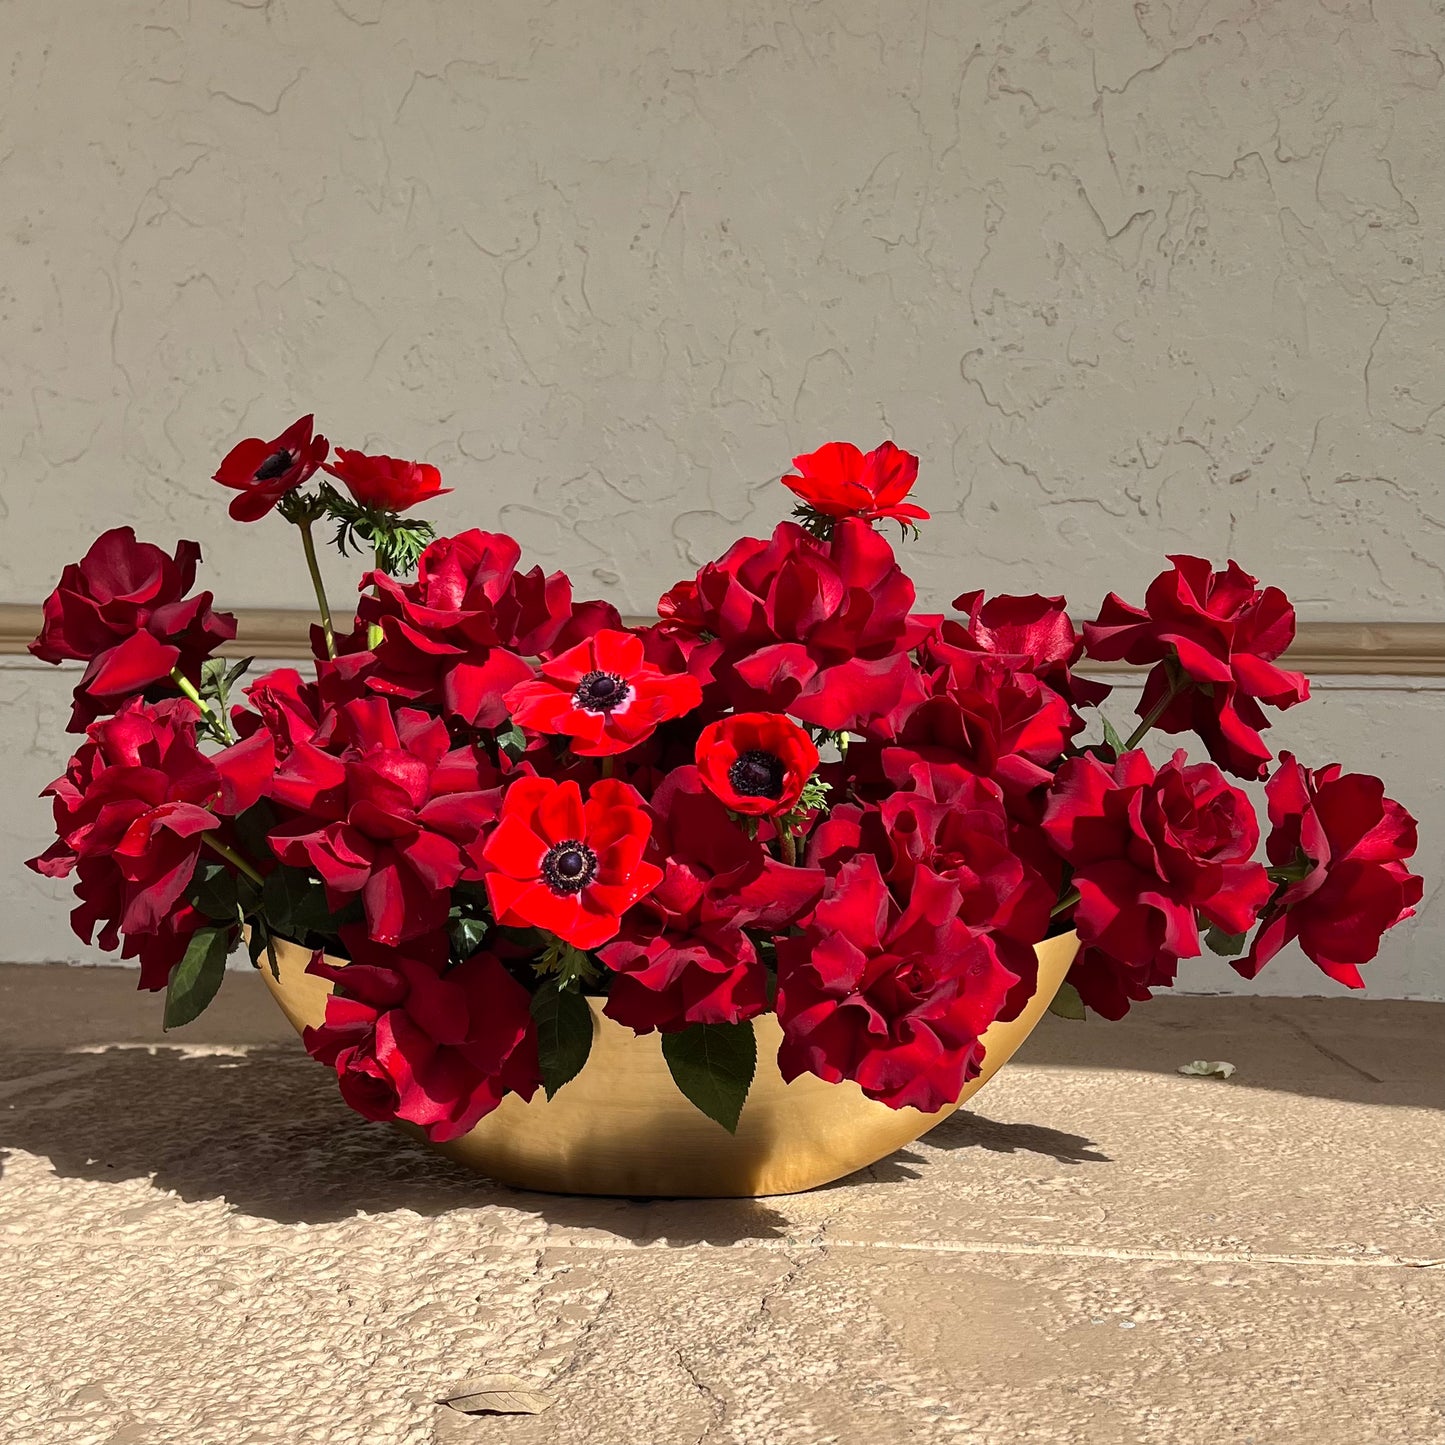 Red roses and red anemones in a gold vase placed on the ground